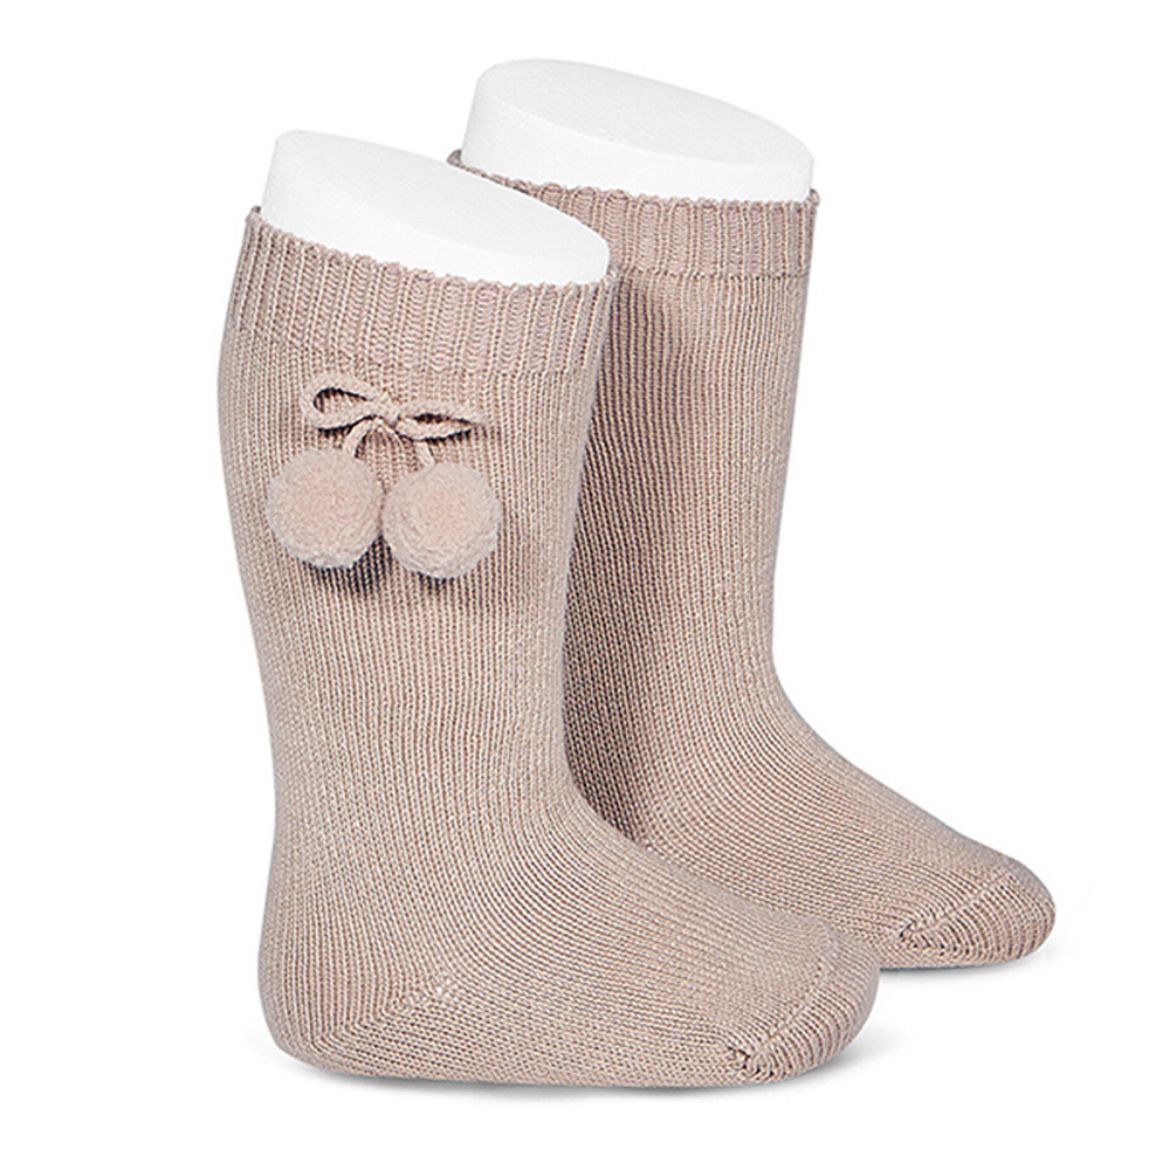 Picture of Condor Knee High Socks with PomPoms - Stone